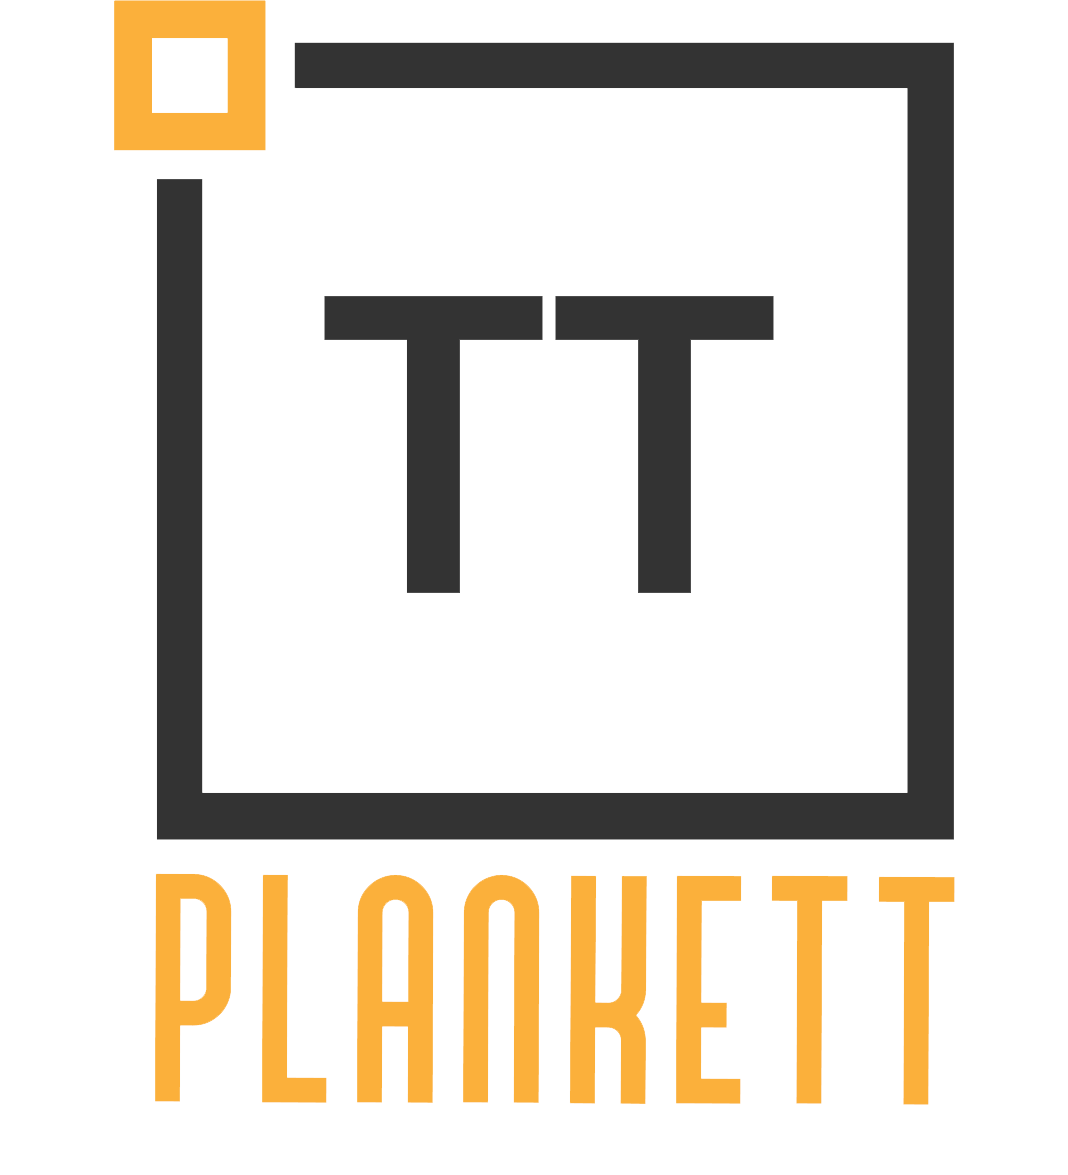 The Plankett - Functionality in STYLE